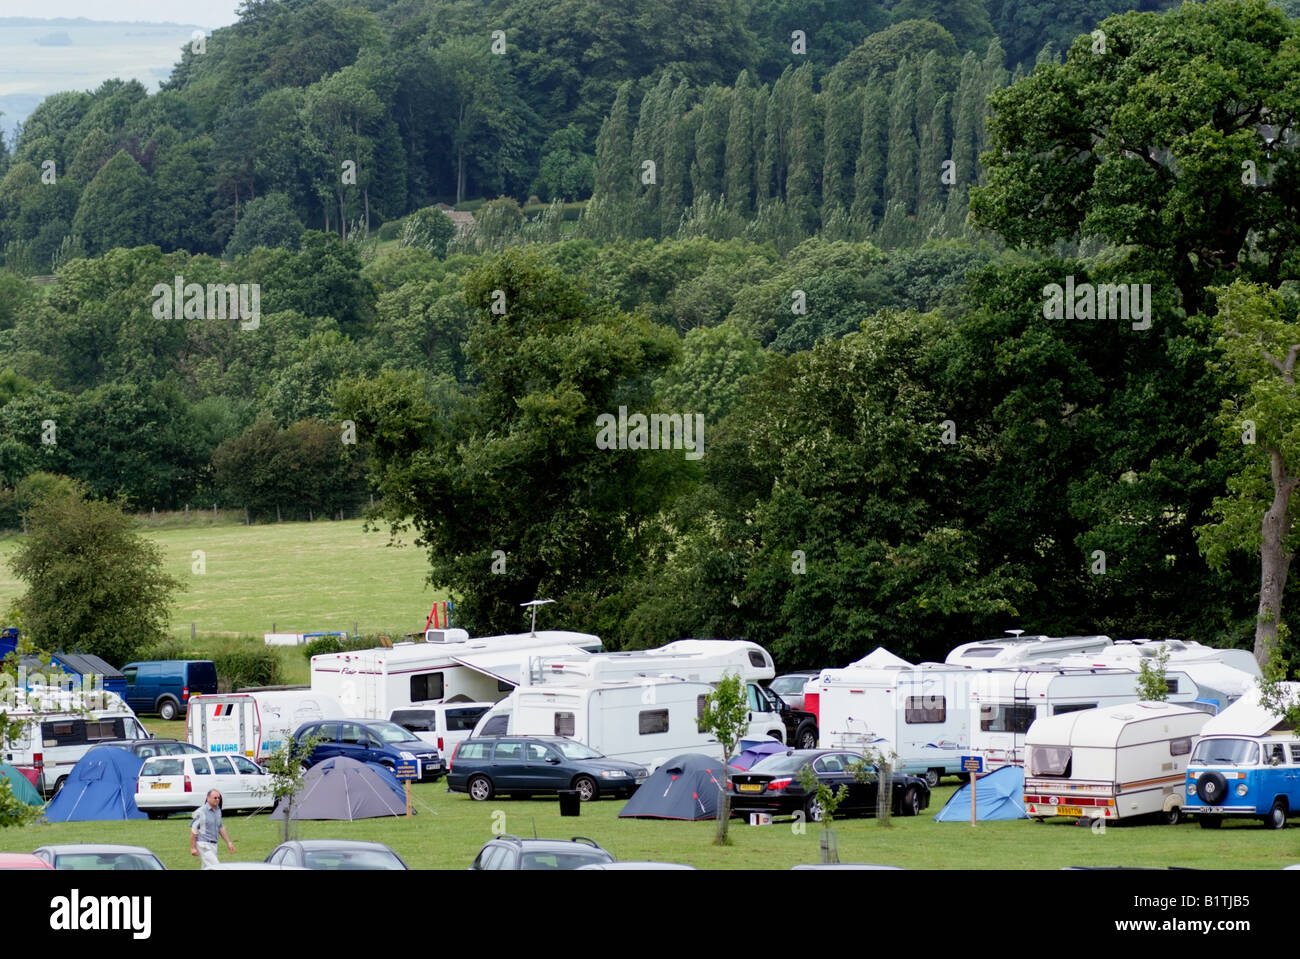 Camping and caravanning in the Cotswolds England UK Stock Photo